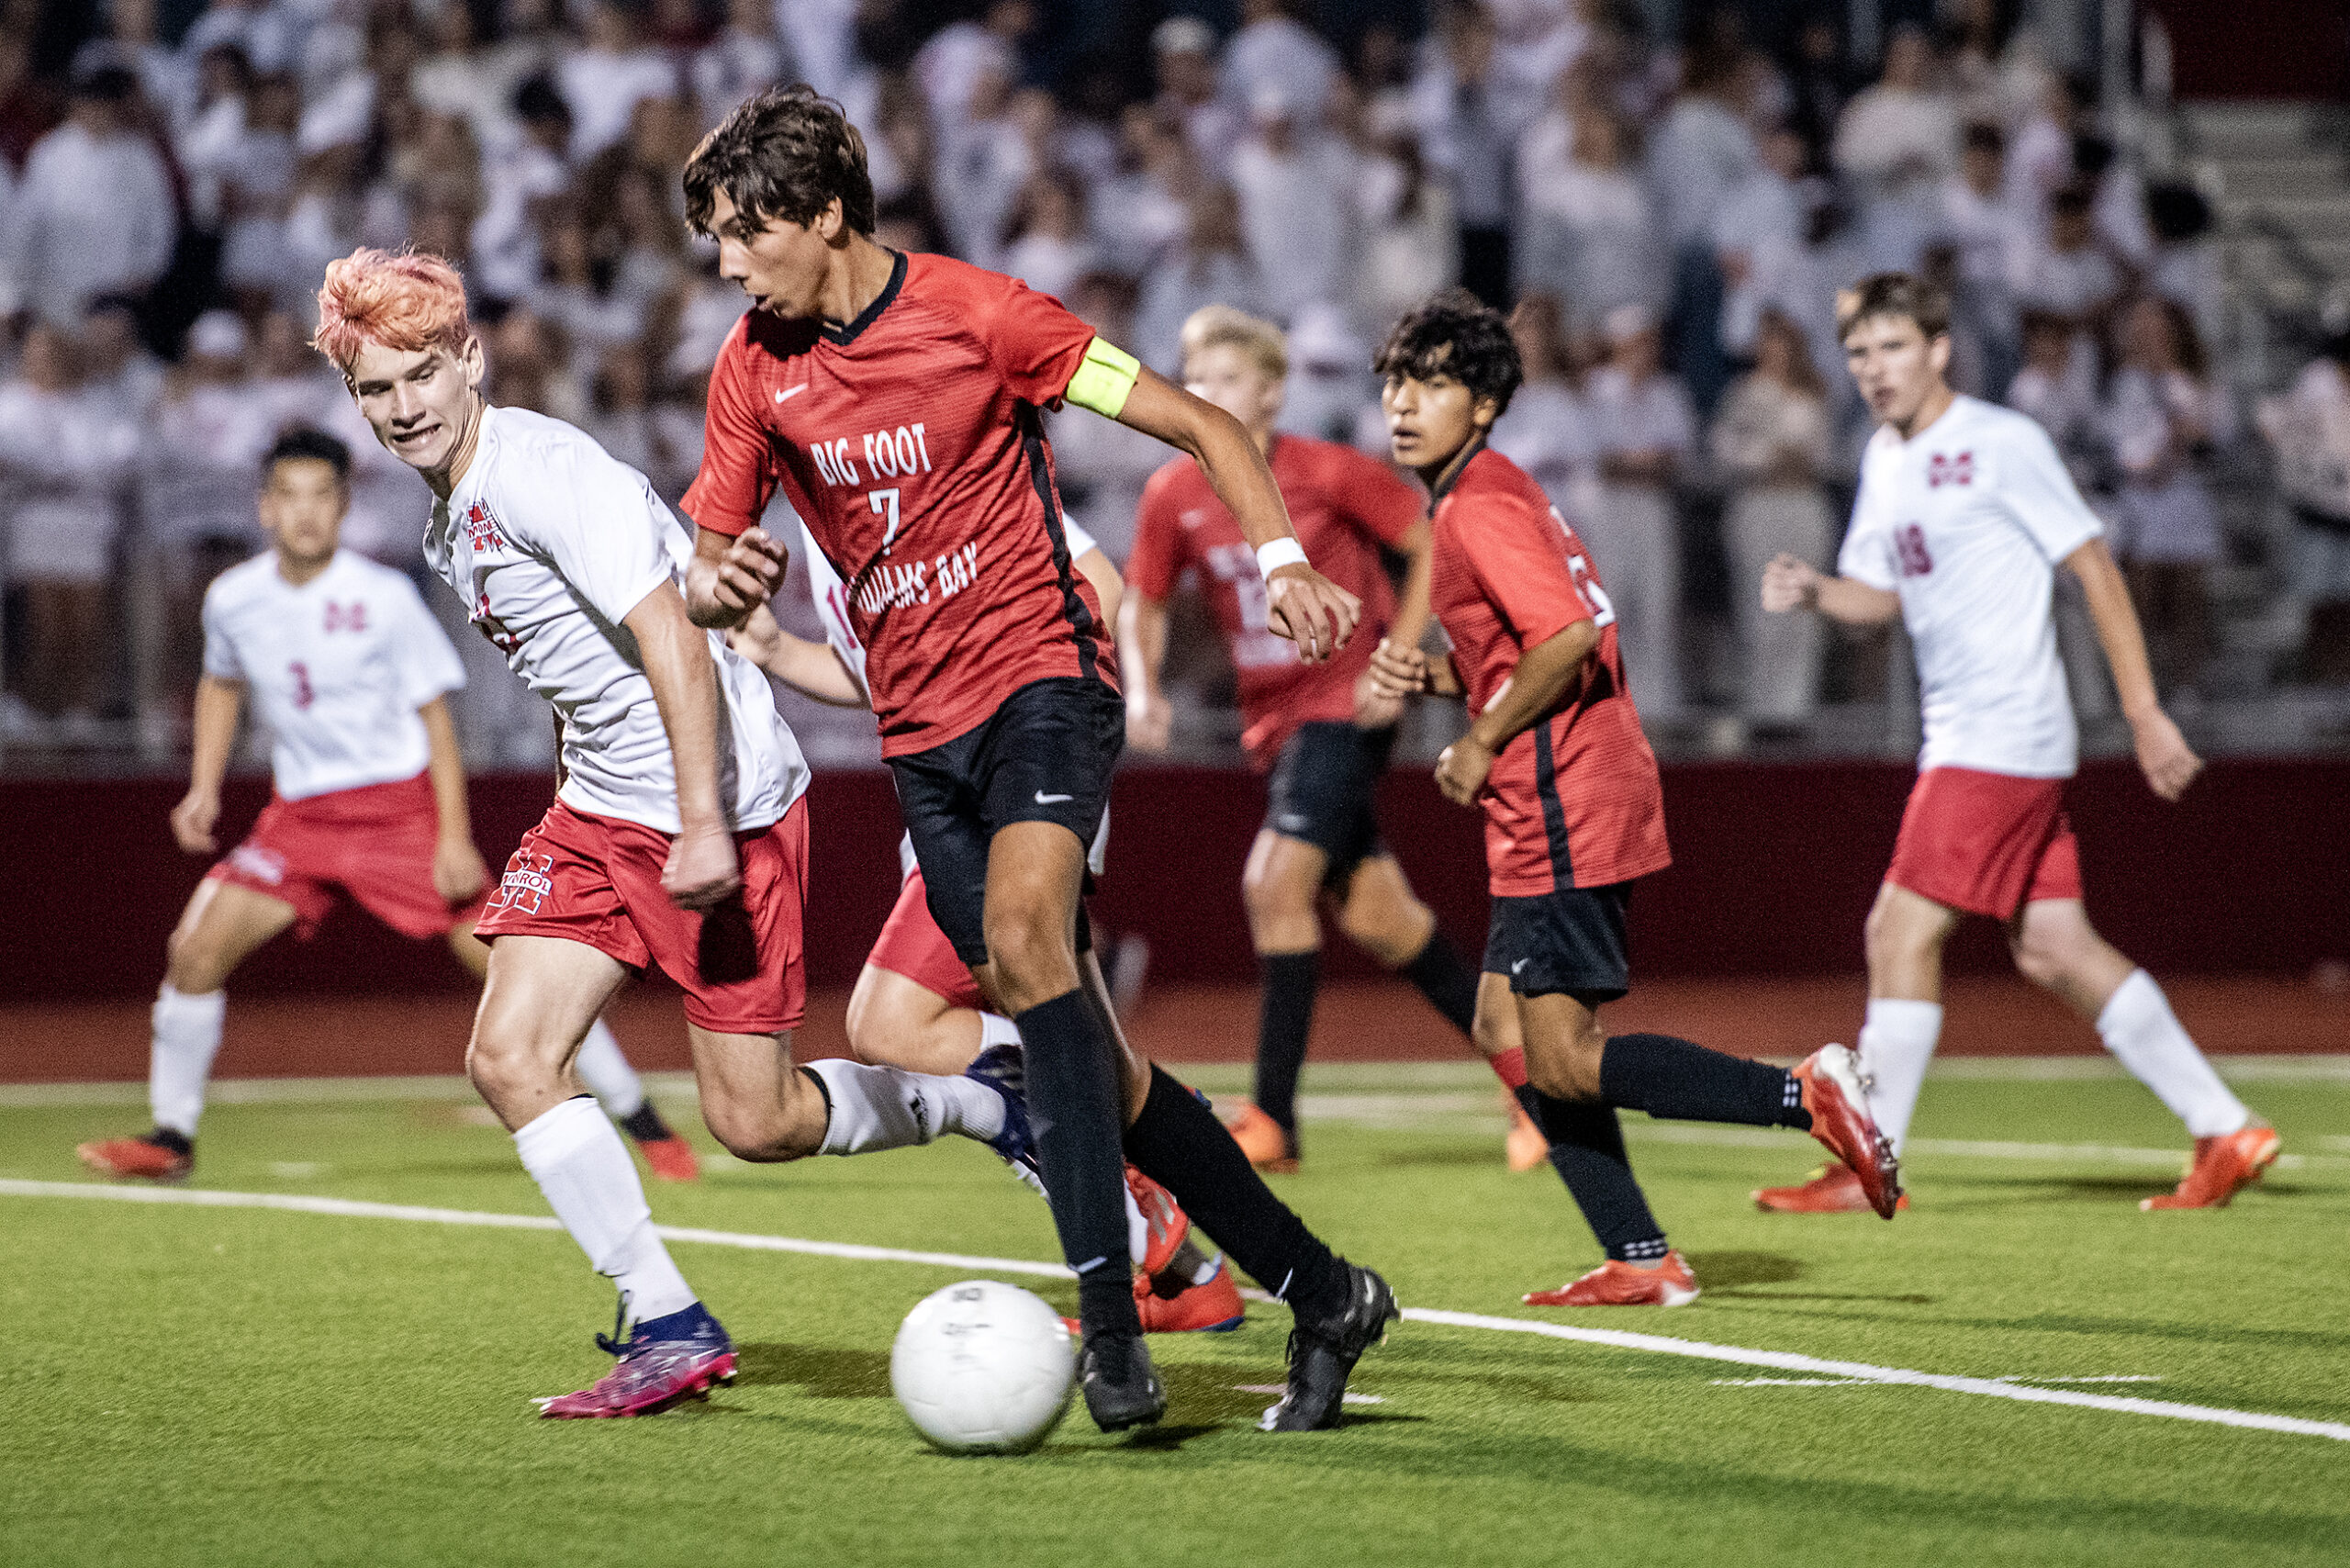 A soccer player in a red jersey kicks the ball as opposing players approach.